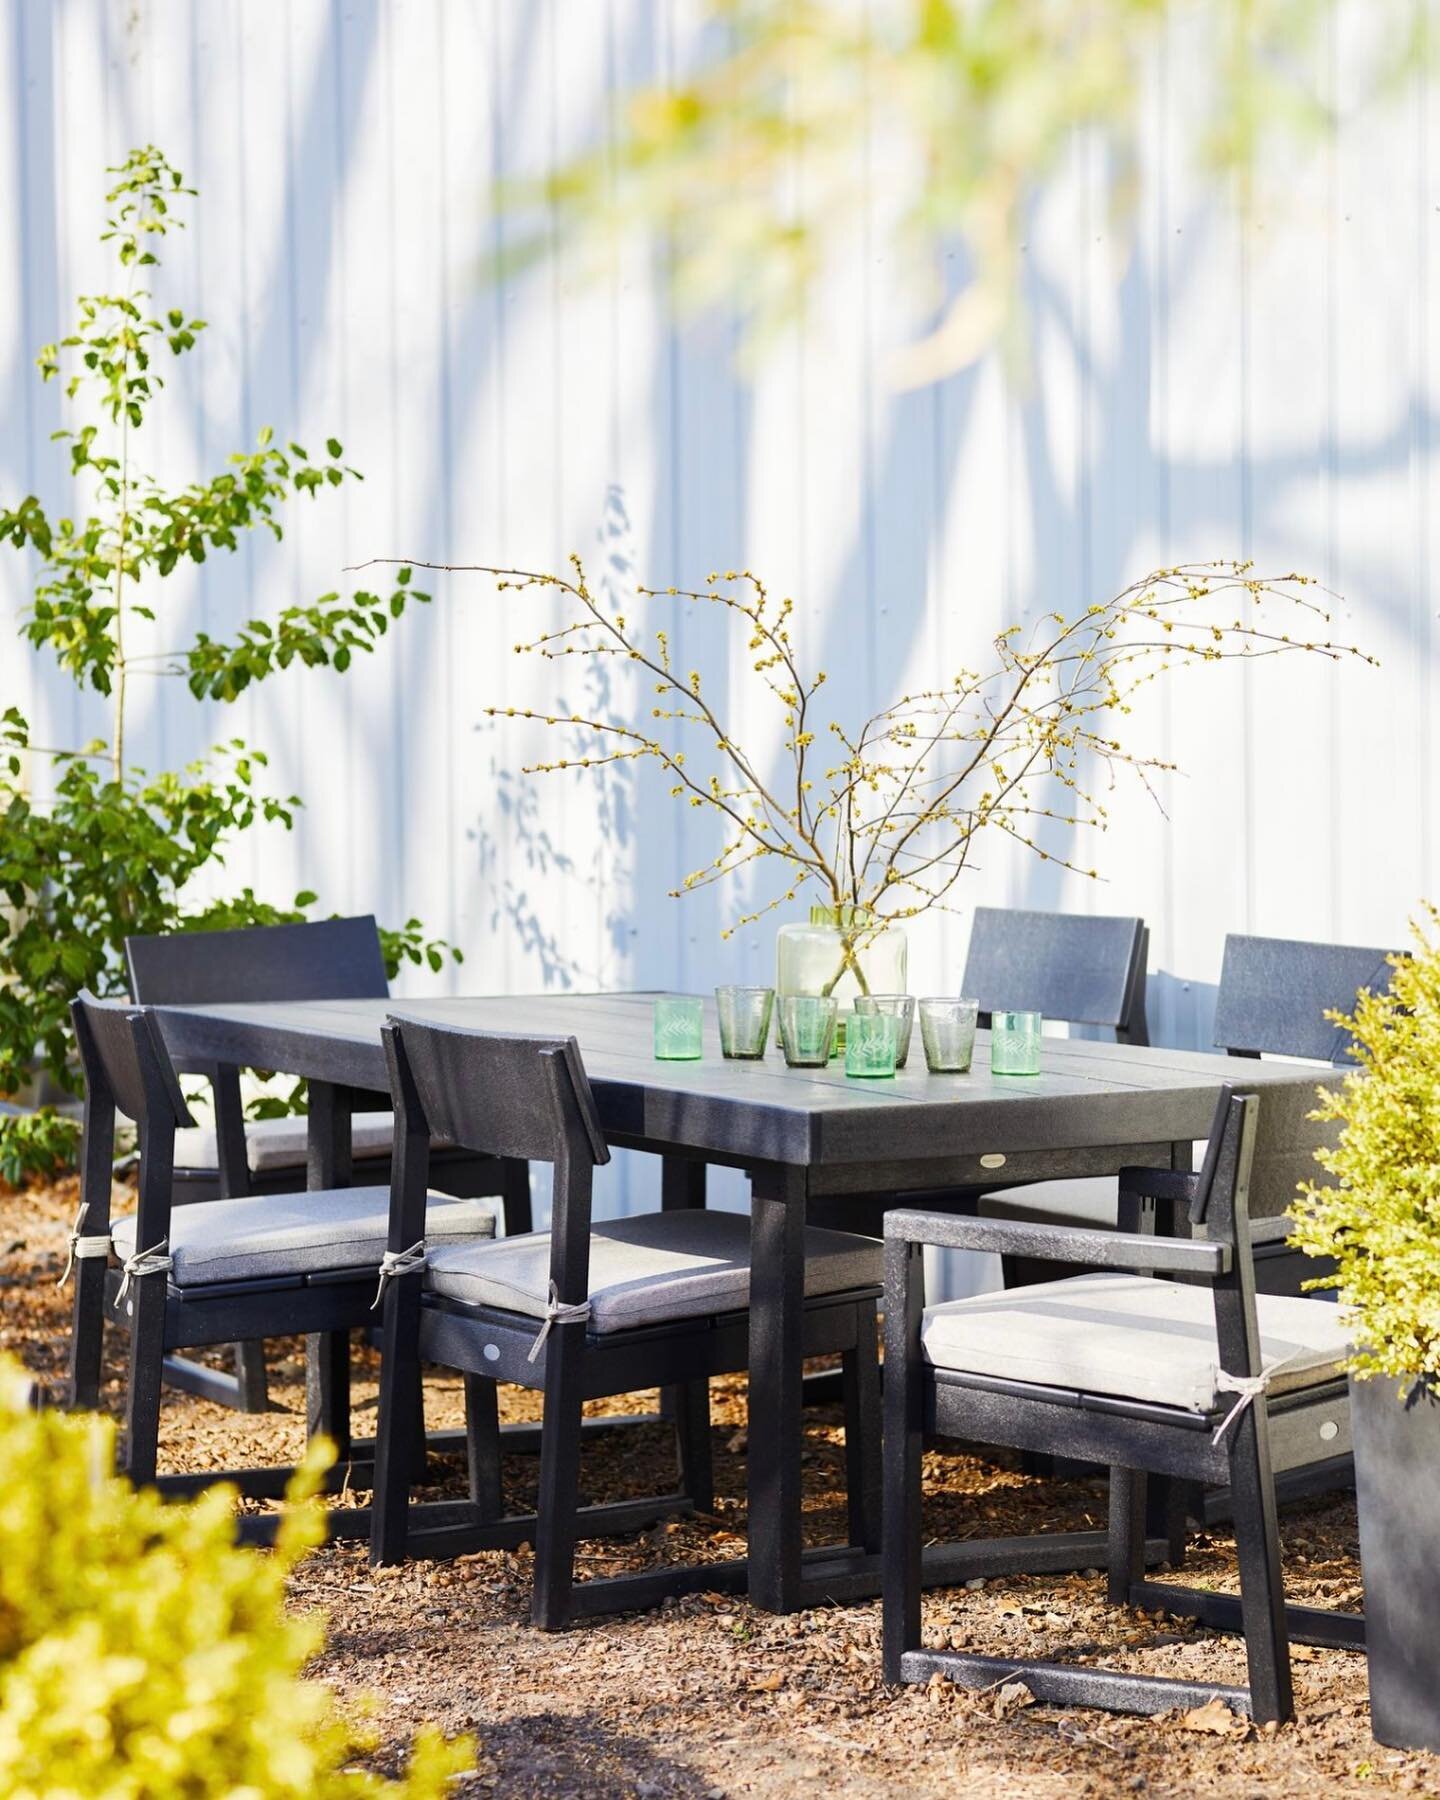 Dining with a sunny disposition. ☀️ Shop our mid century modern #polywood outdoor dining set in-store today. 

#outdoorstyle #patiofurniture #madeintheusa #madeinamerica #sustainablefurniture #dundeegardens #shopsmall #shopnepa #smallbudiness